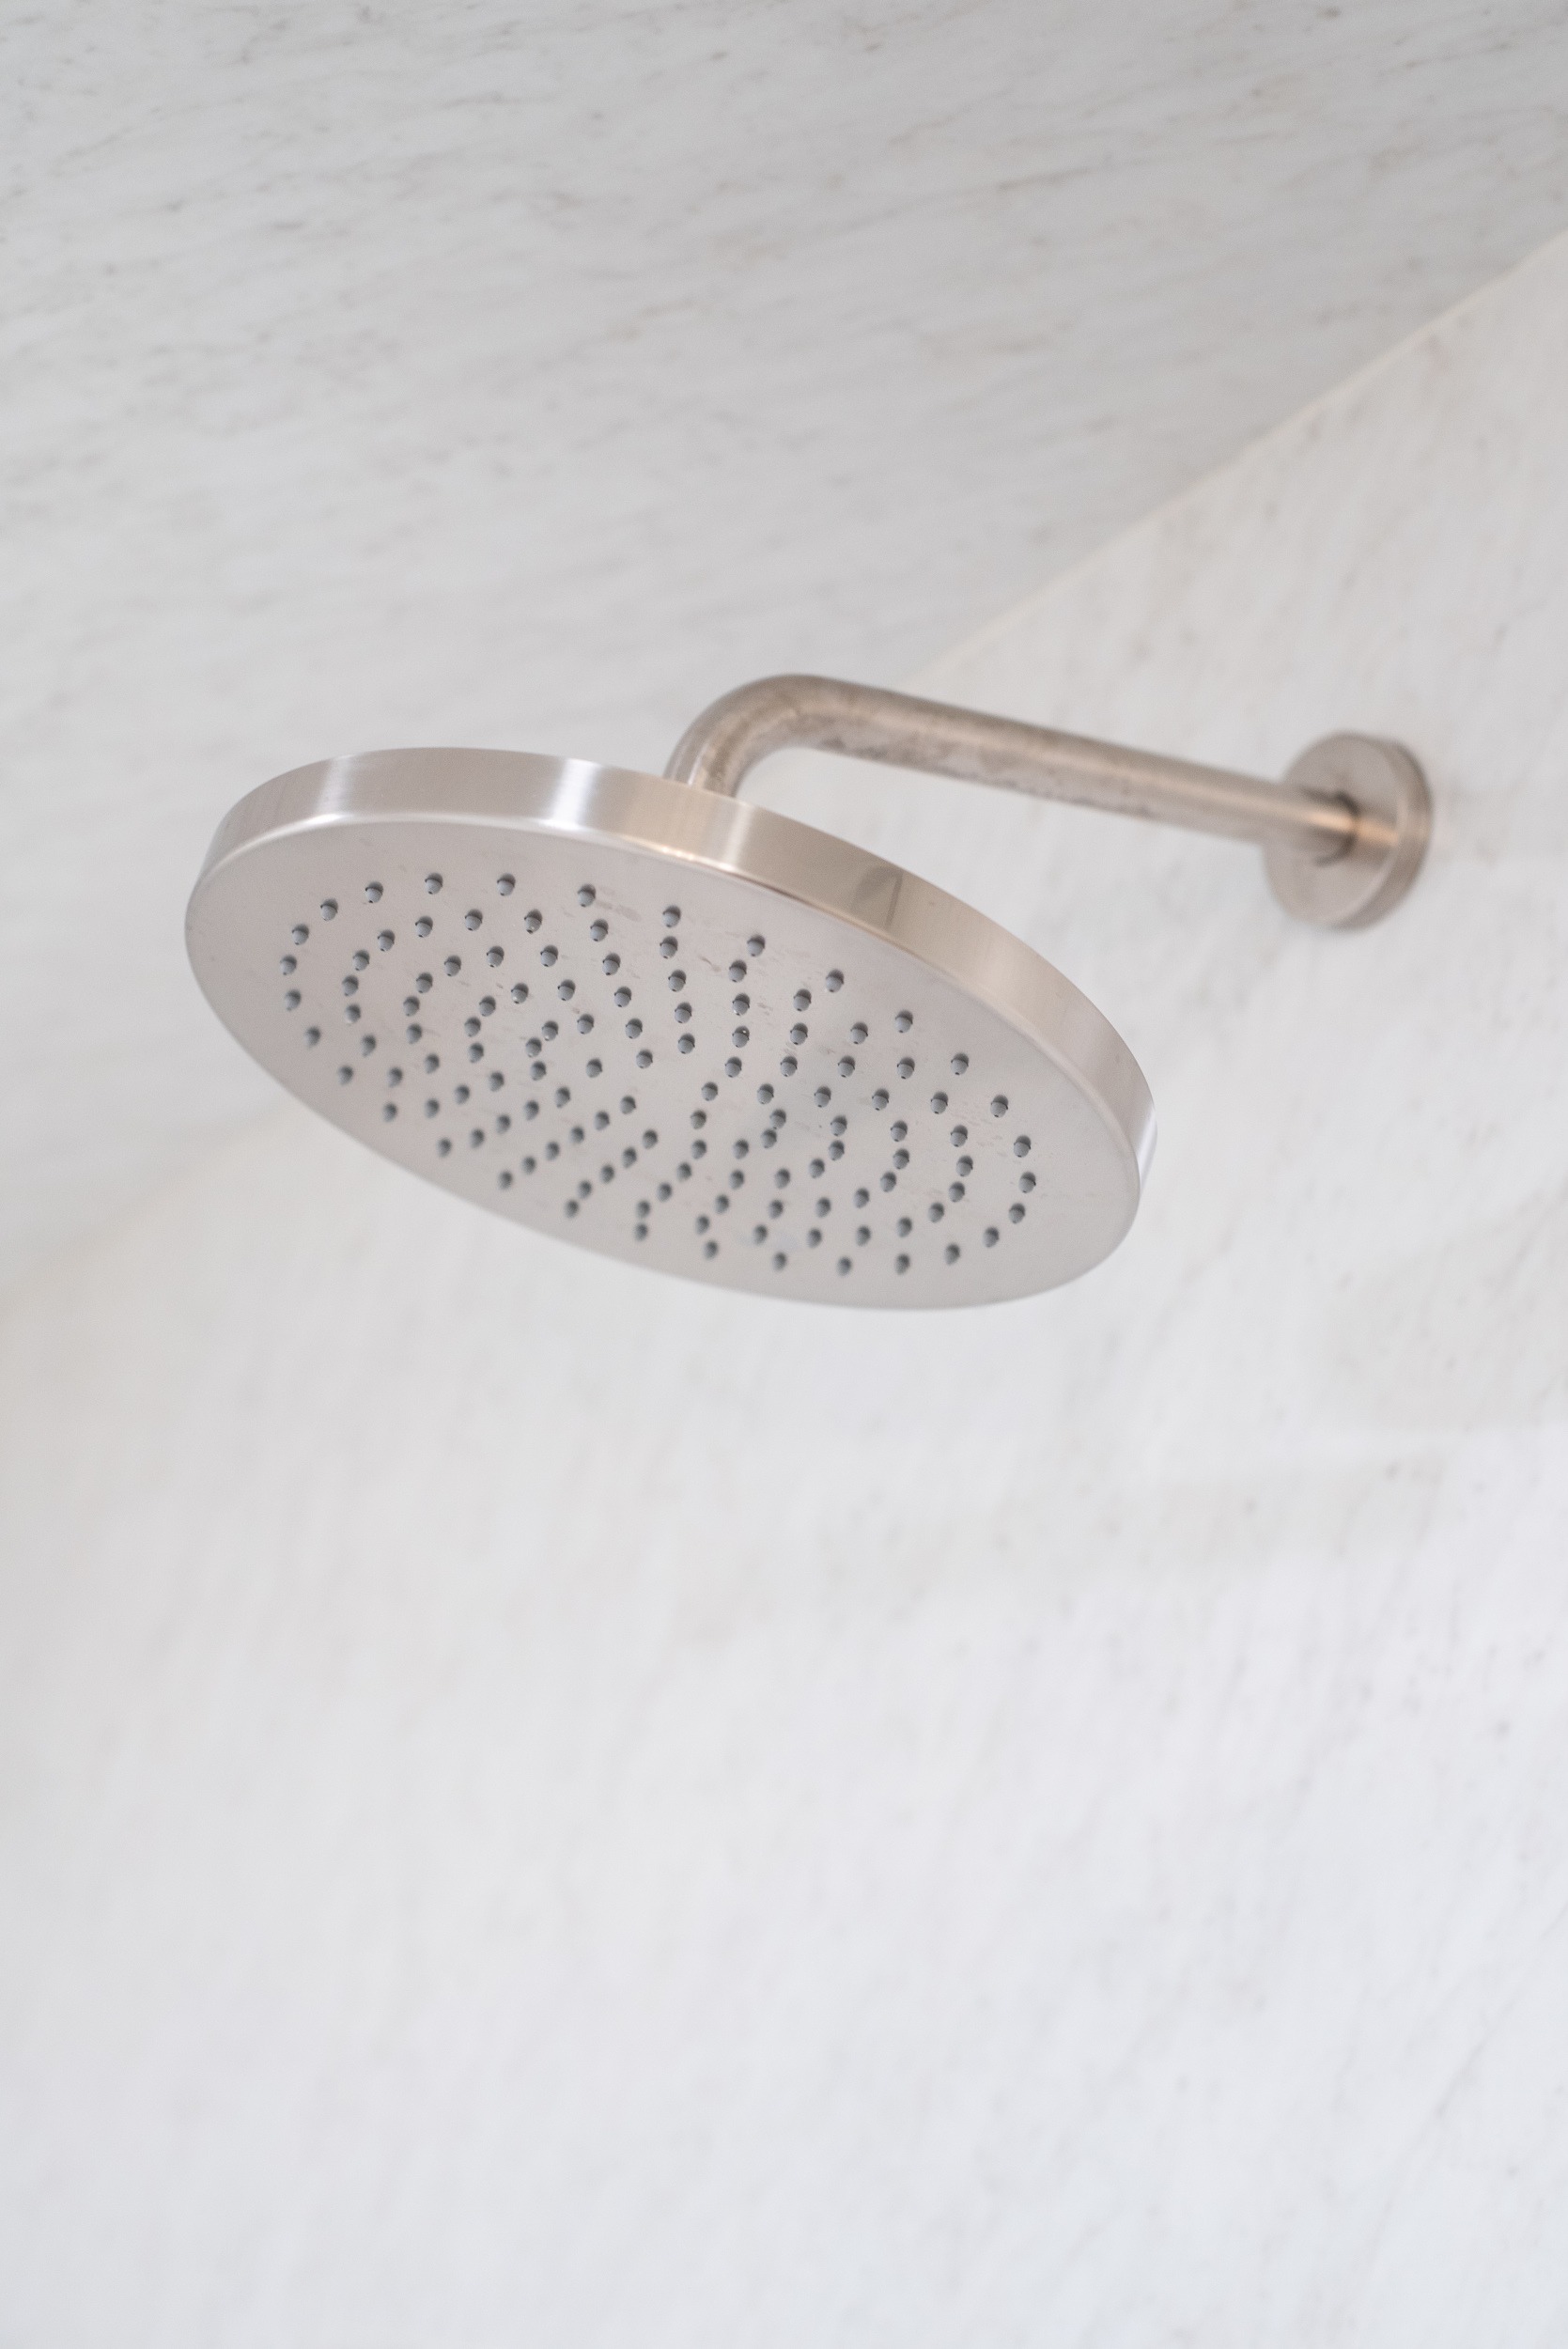 large stainless steel shower head